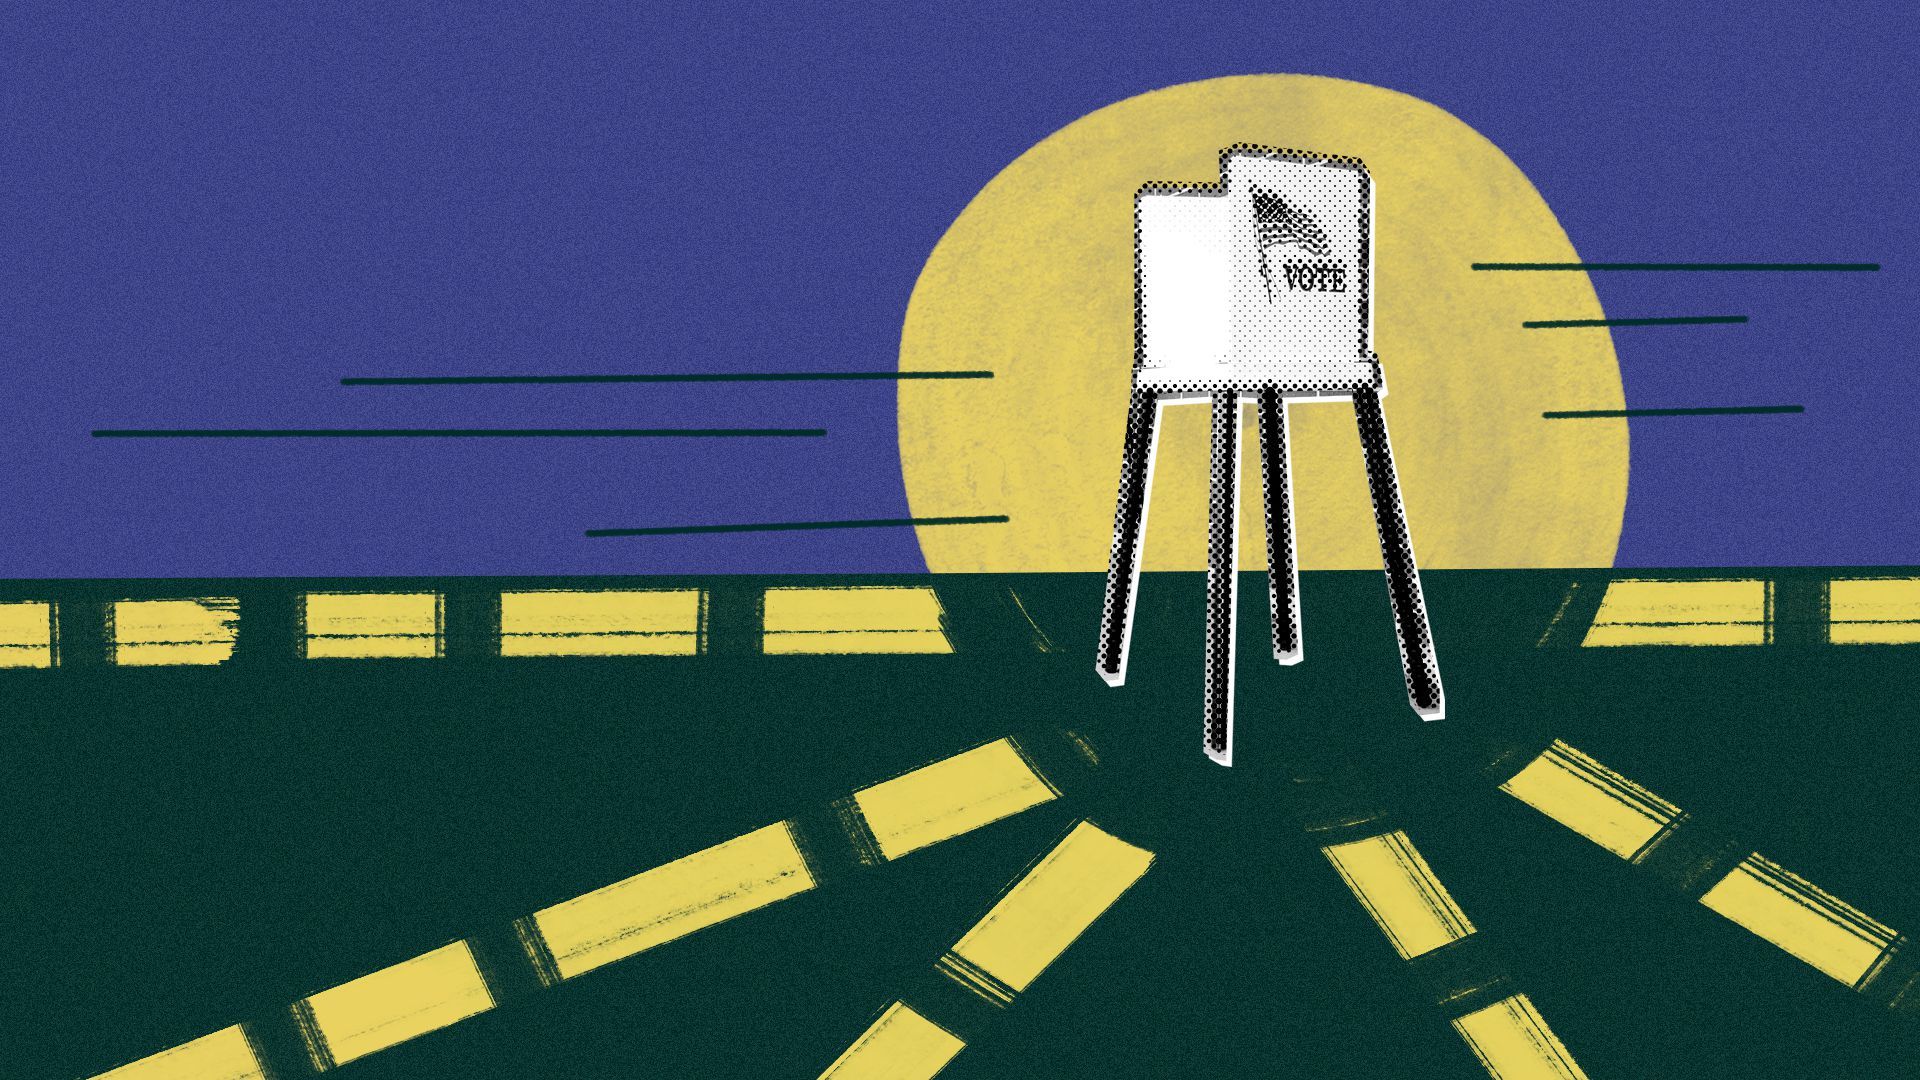 Illustration of a voting booth at the center of a crossroads. 